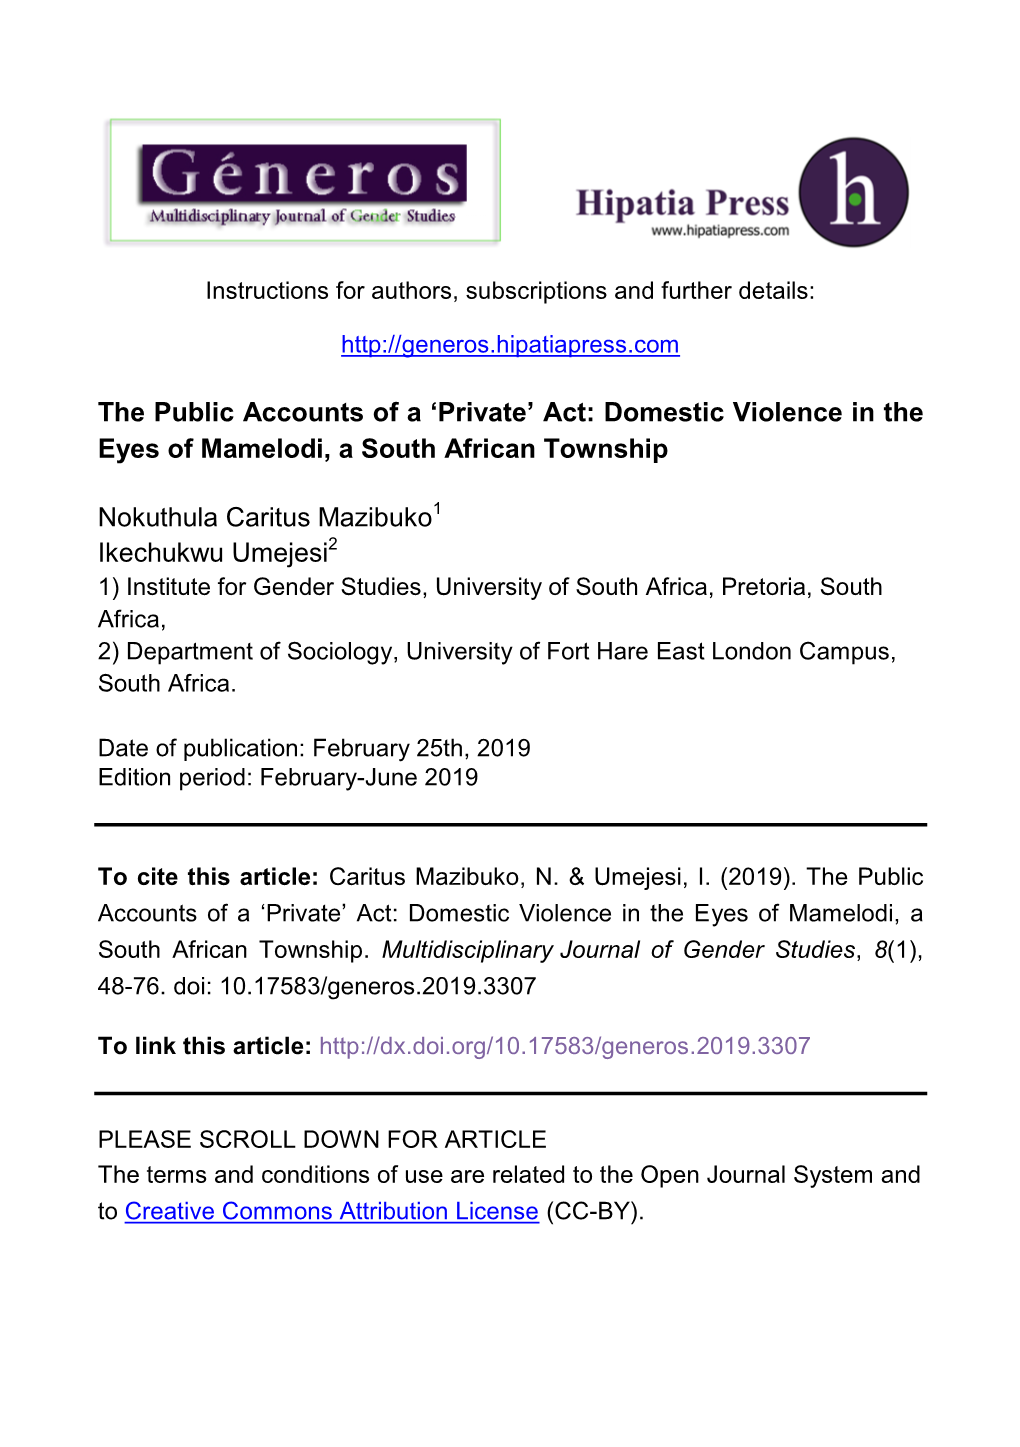 The Public Accounts of a 'Private'act: Domestic Violence in the Eyes of Mamelodi, a South African Township